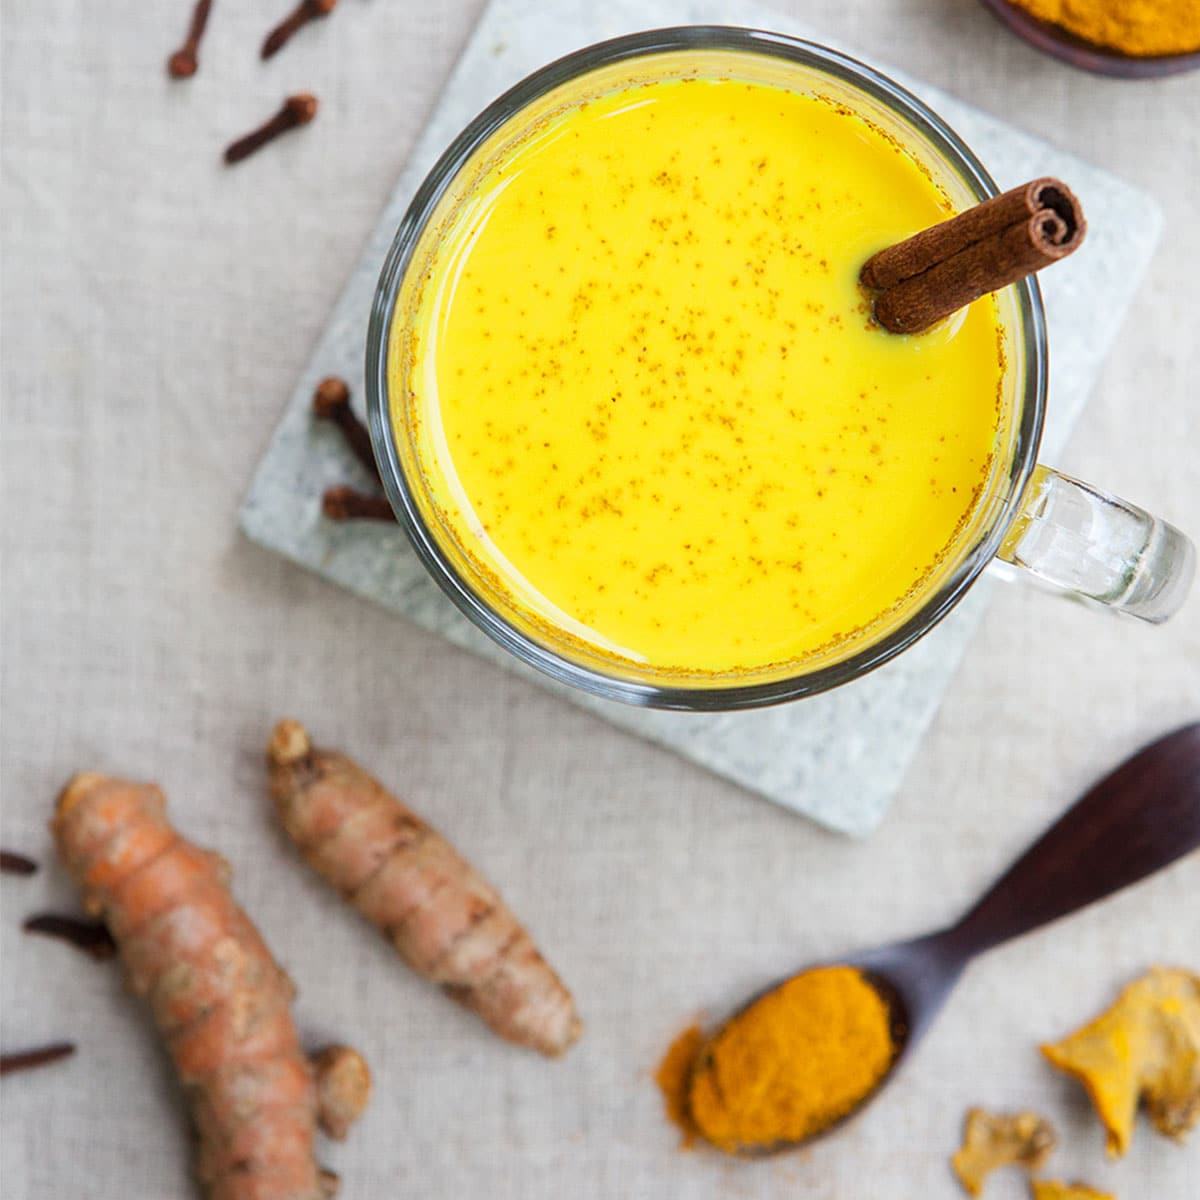 Don’t forget to clean your kitchen utensils as quickly as you can once you’ve finished with them. The longer you leave turmeric stains in place, the harder it is to get rid of them.